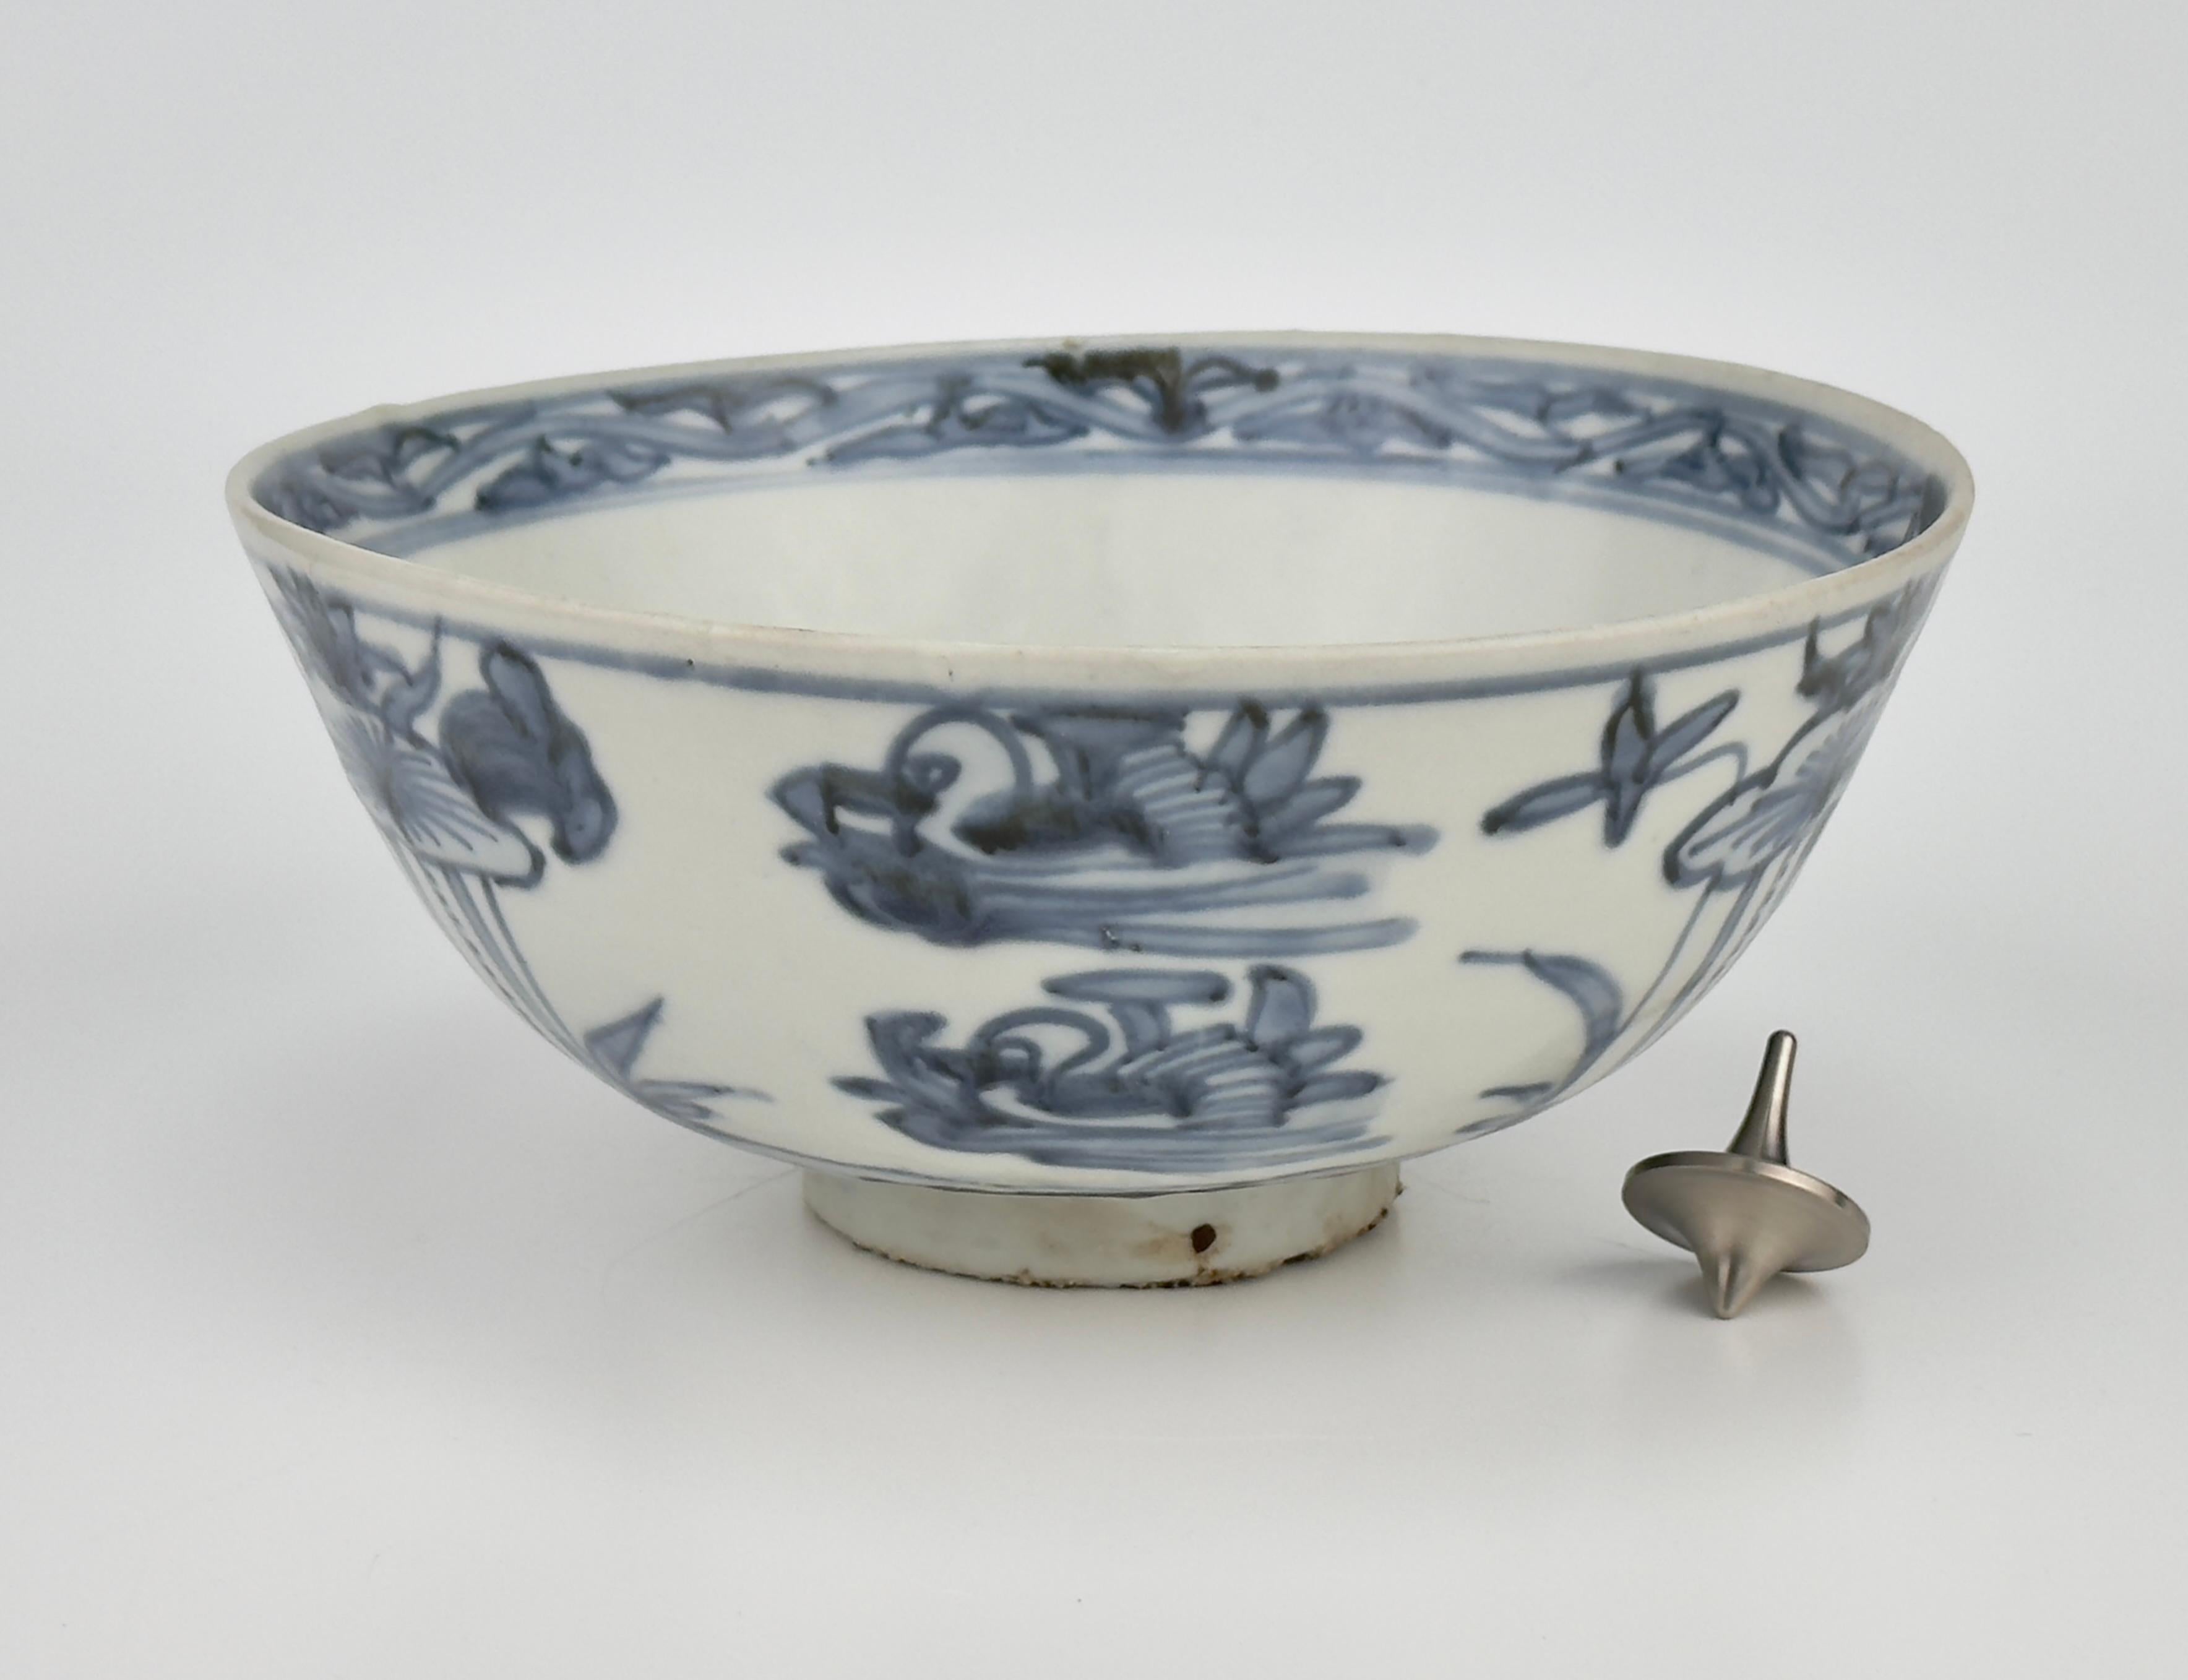 Bowl with mandarin duck and lotus pattern design, Late Ming Era(16-17th century) For Sale 6